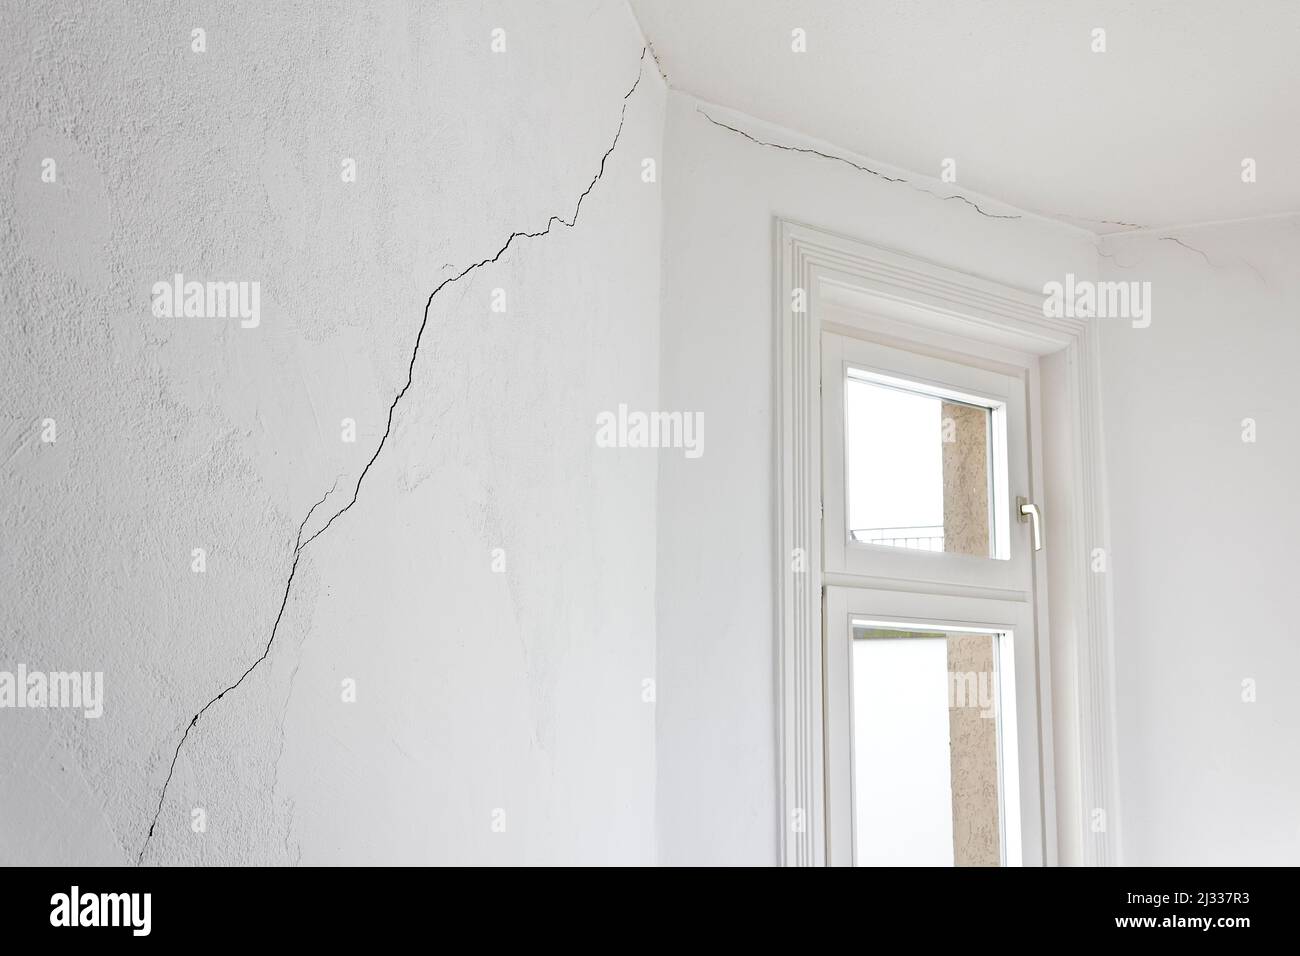 Building damage concept: very long crack in the wall of an apartment or flat in an old house, caused by an earthquake or landslide. Stock Photo